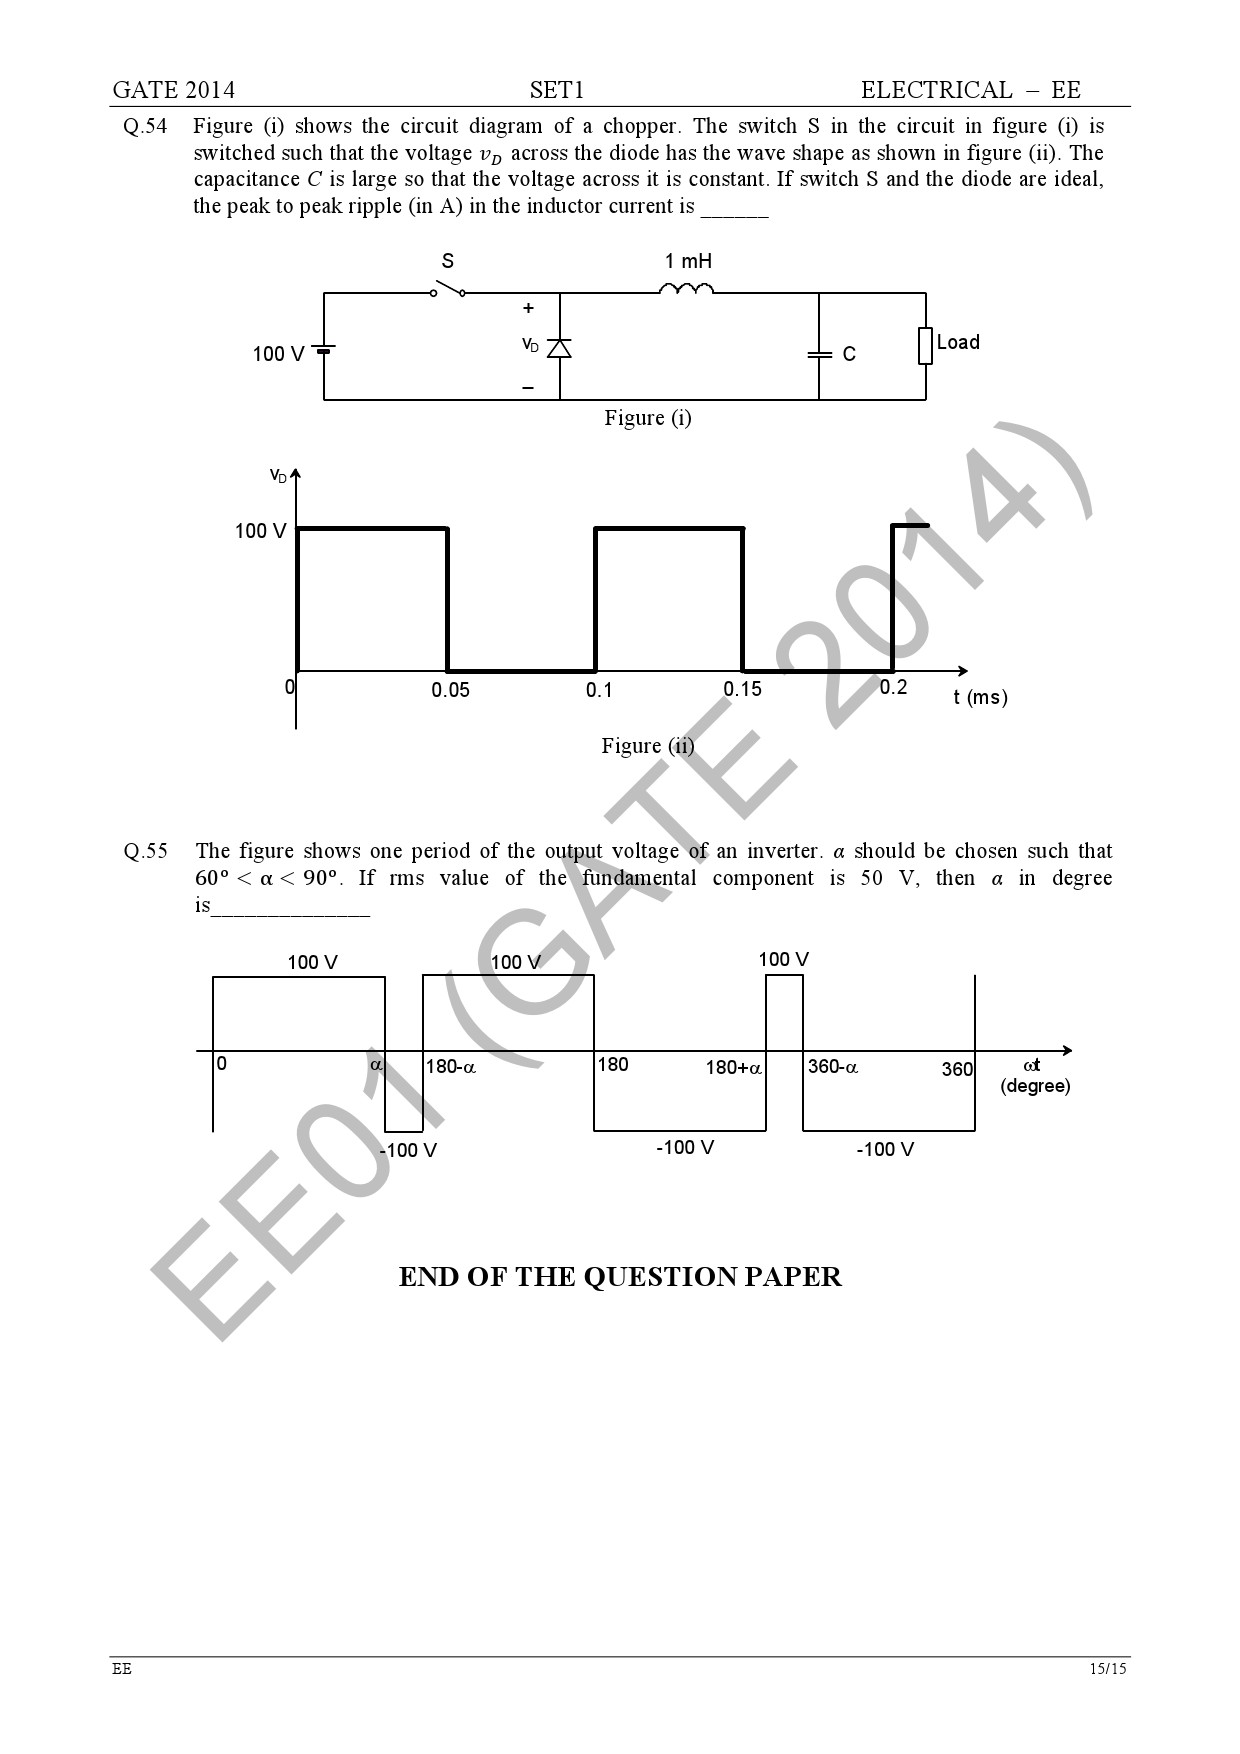 GATE Exam Question Paper 2014 Electrical Engineering Set 1 21